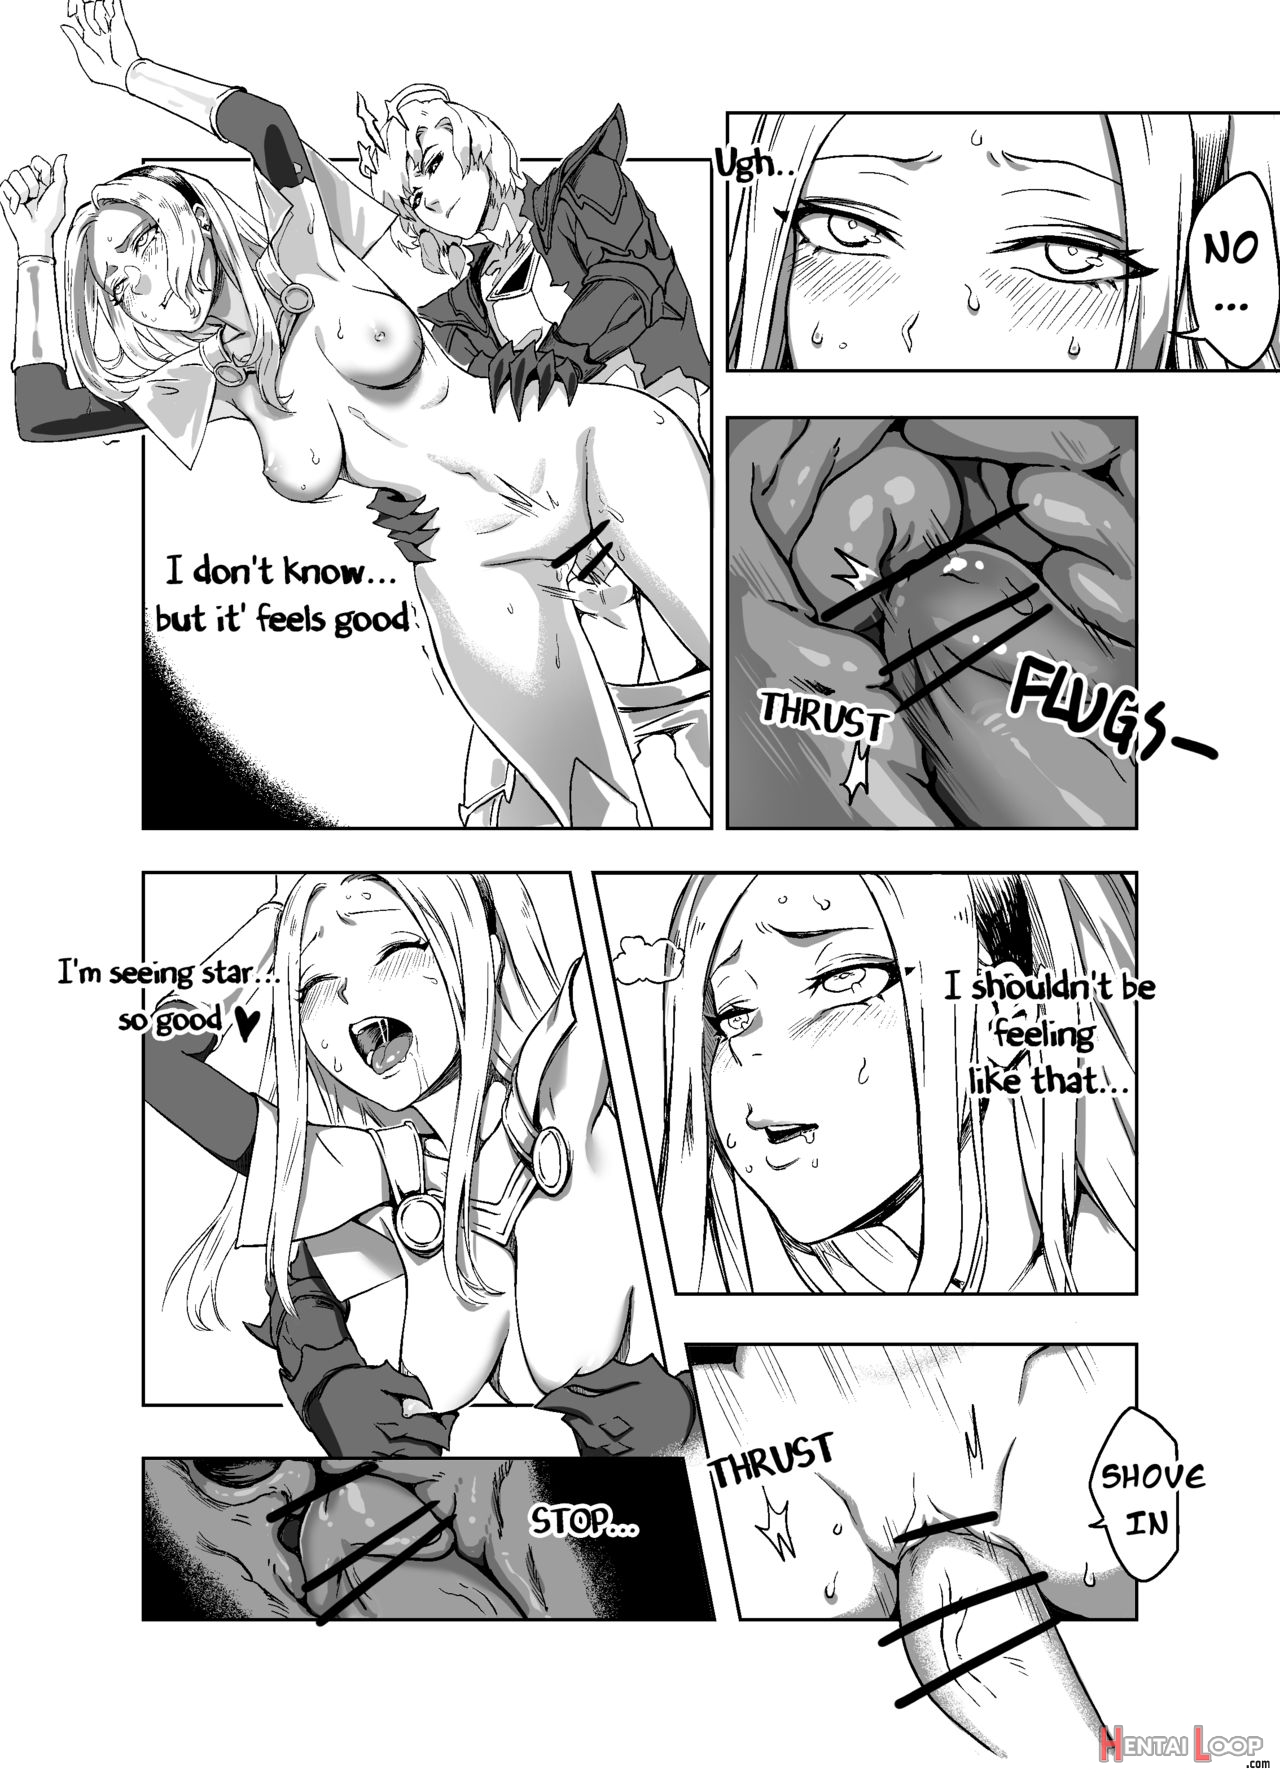 Lux X Viego Ft. Ezreal page 13